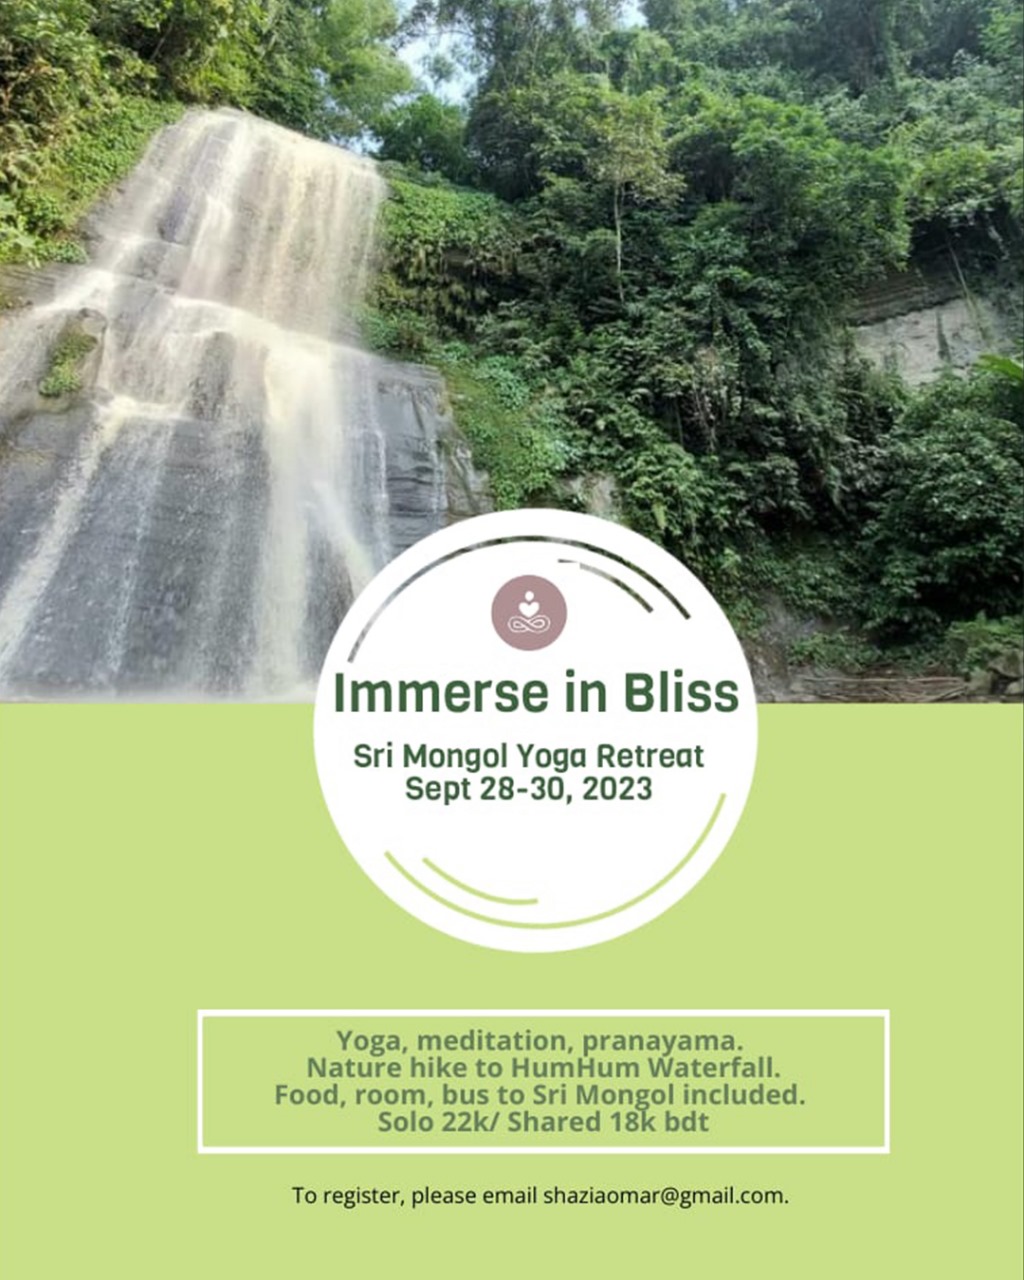 Immerse in Bliss